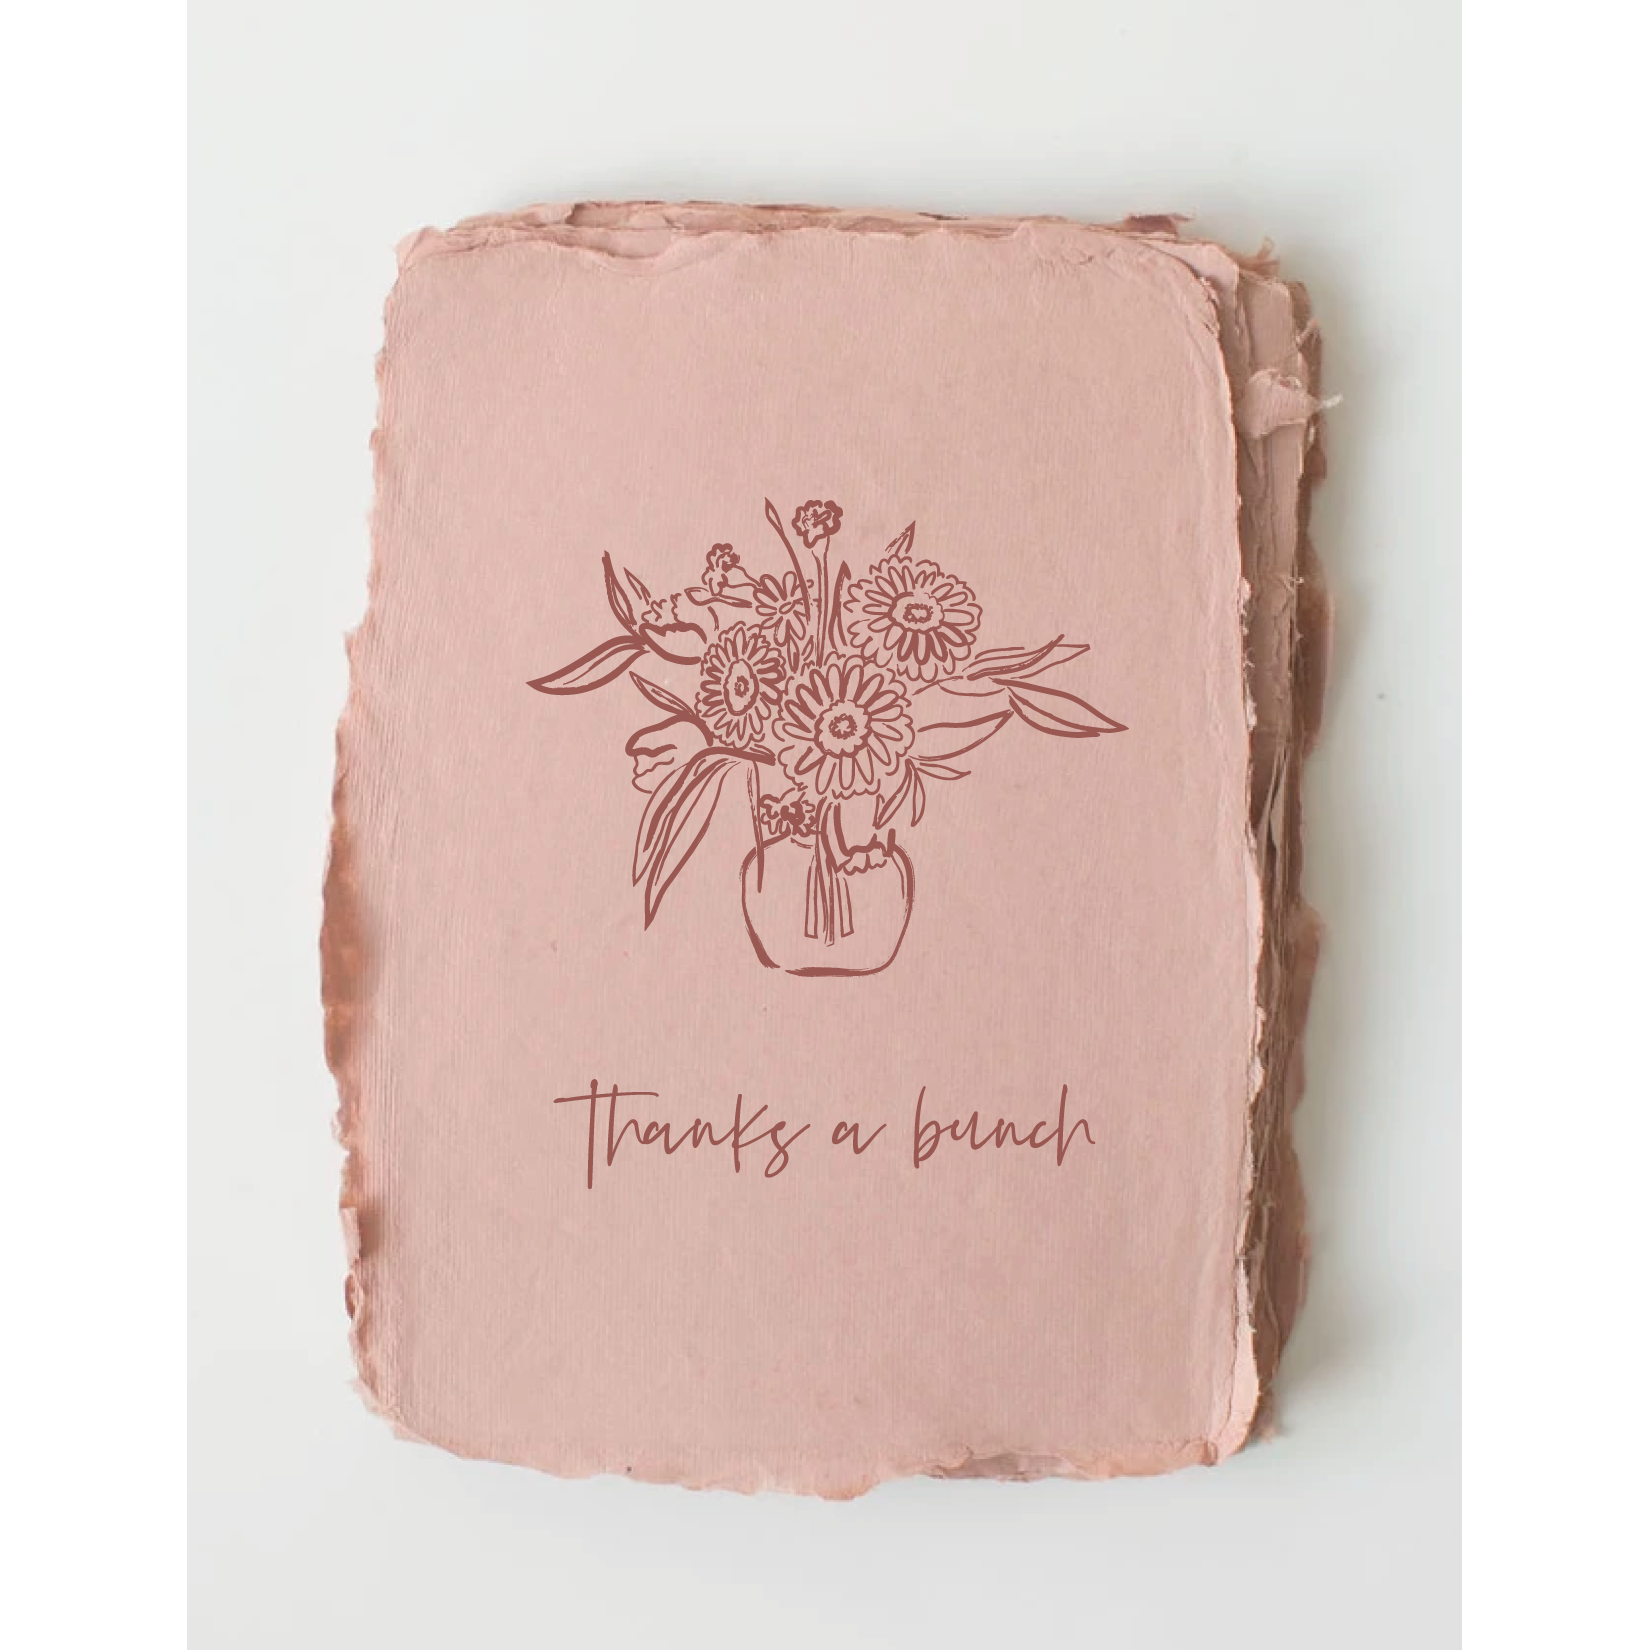 "Thanks a bunch" Floral Bouquet Greeting Card